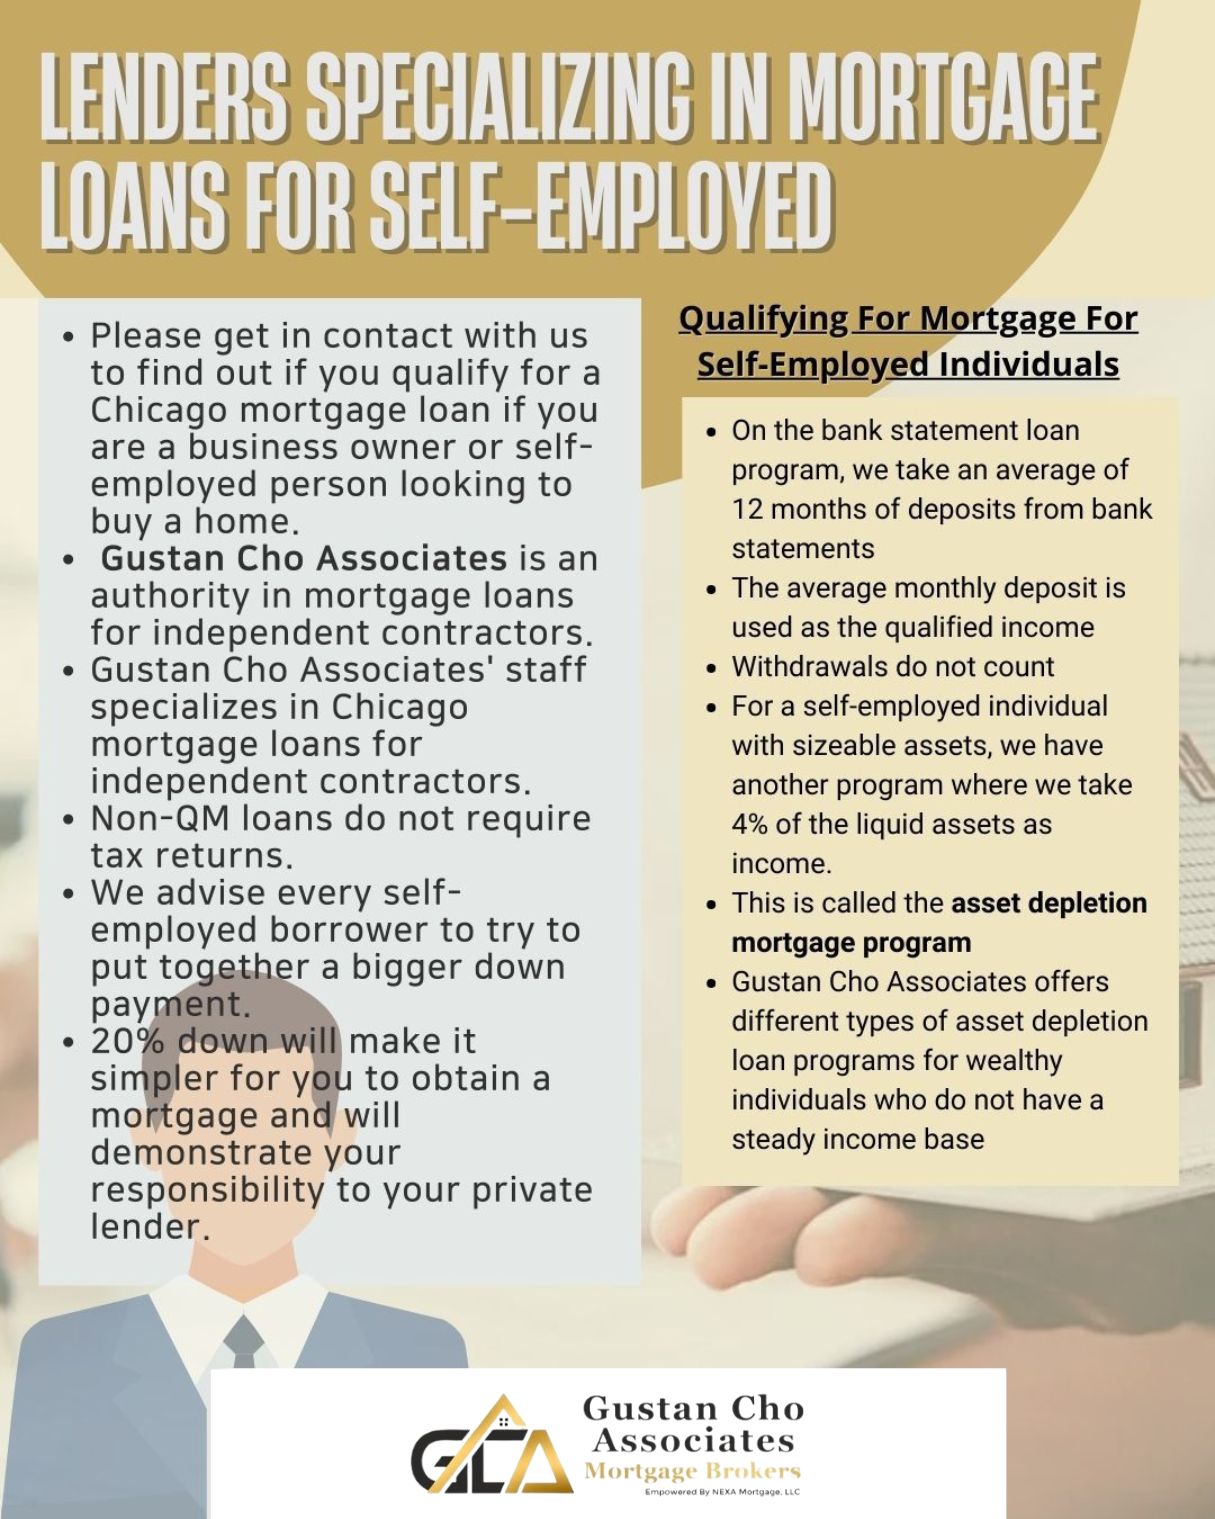 Chicago Mortgage Loans For Self-Employed Individuals